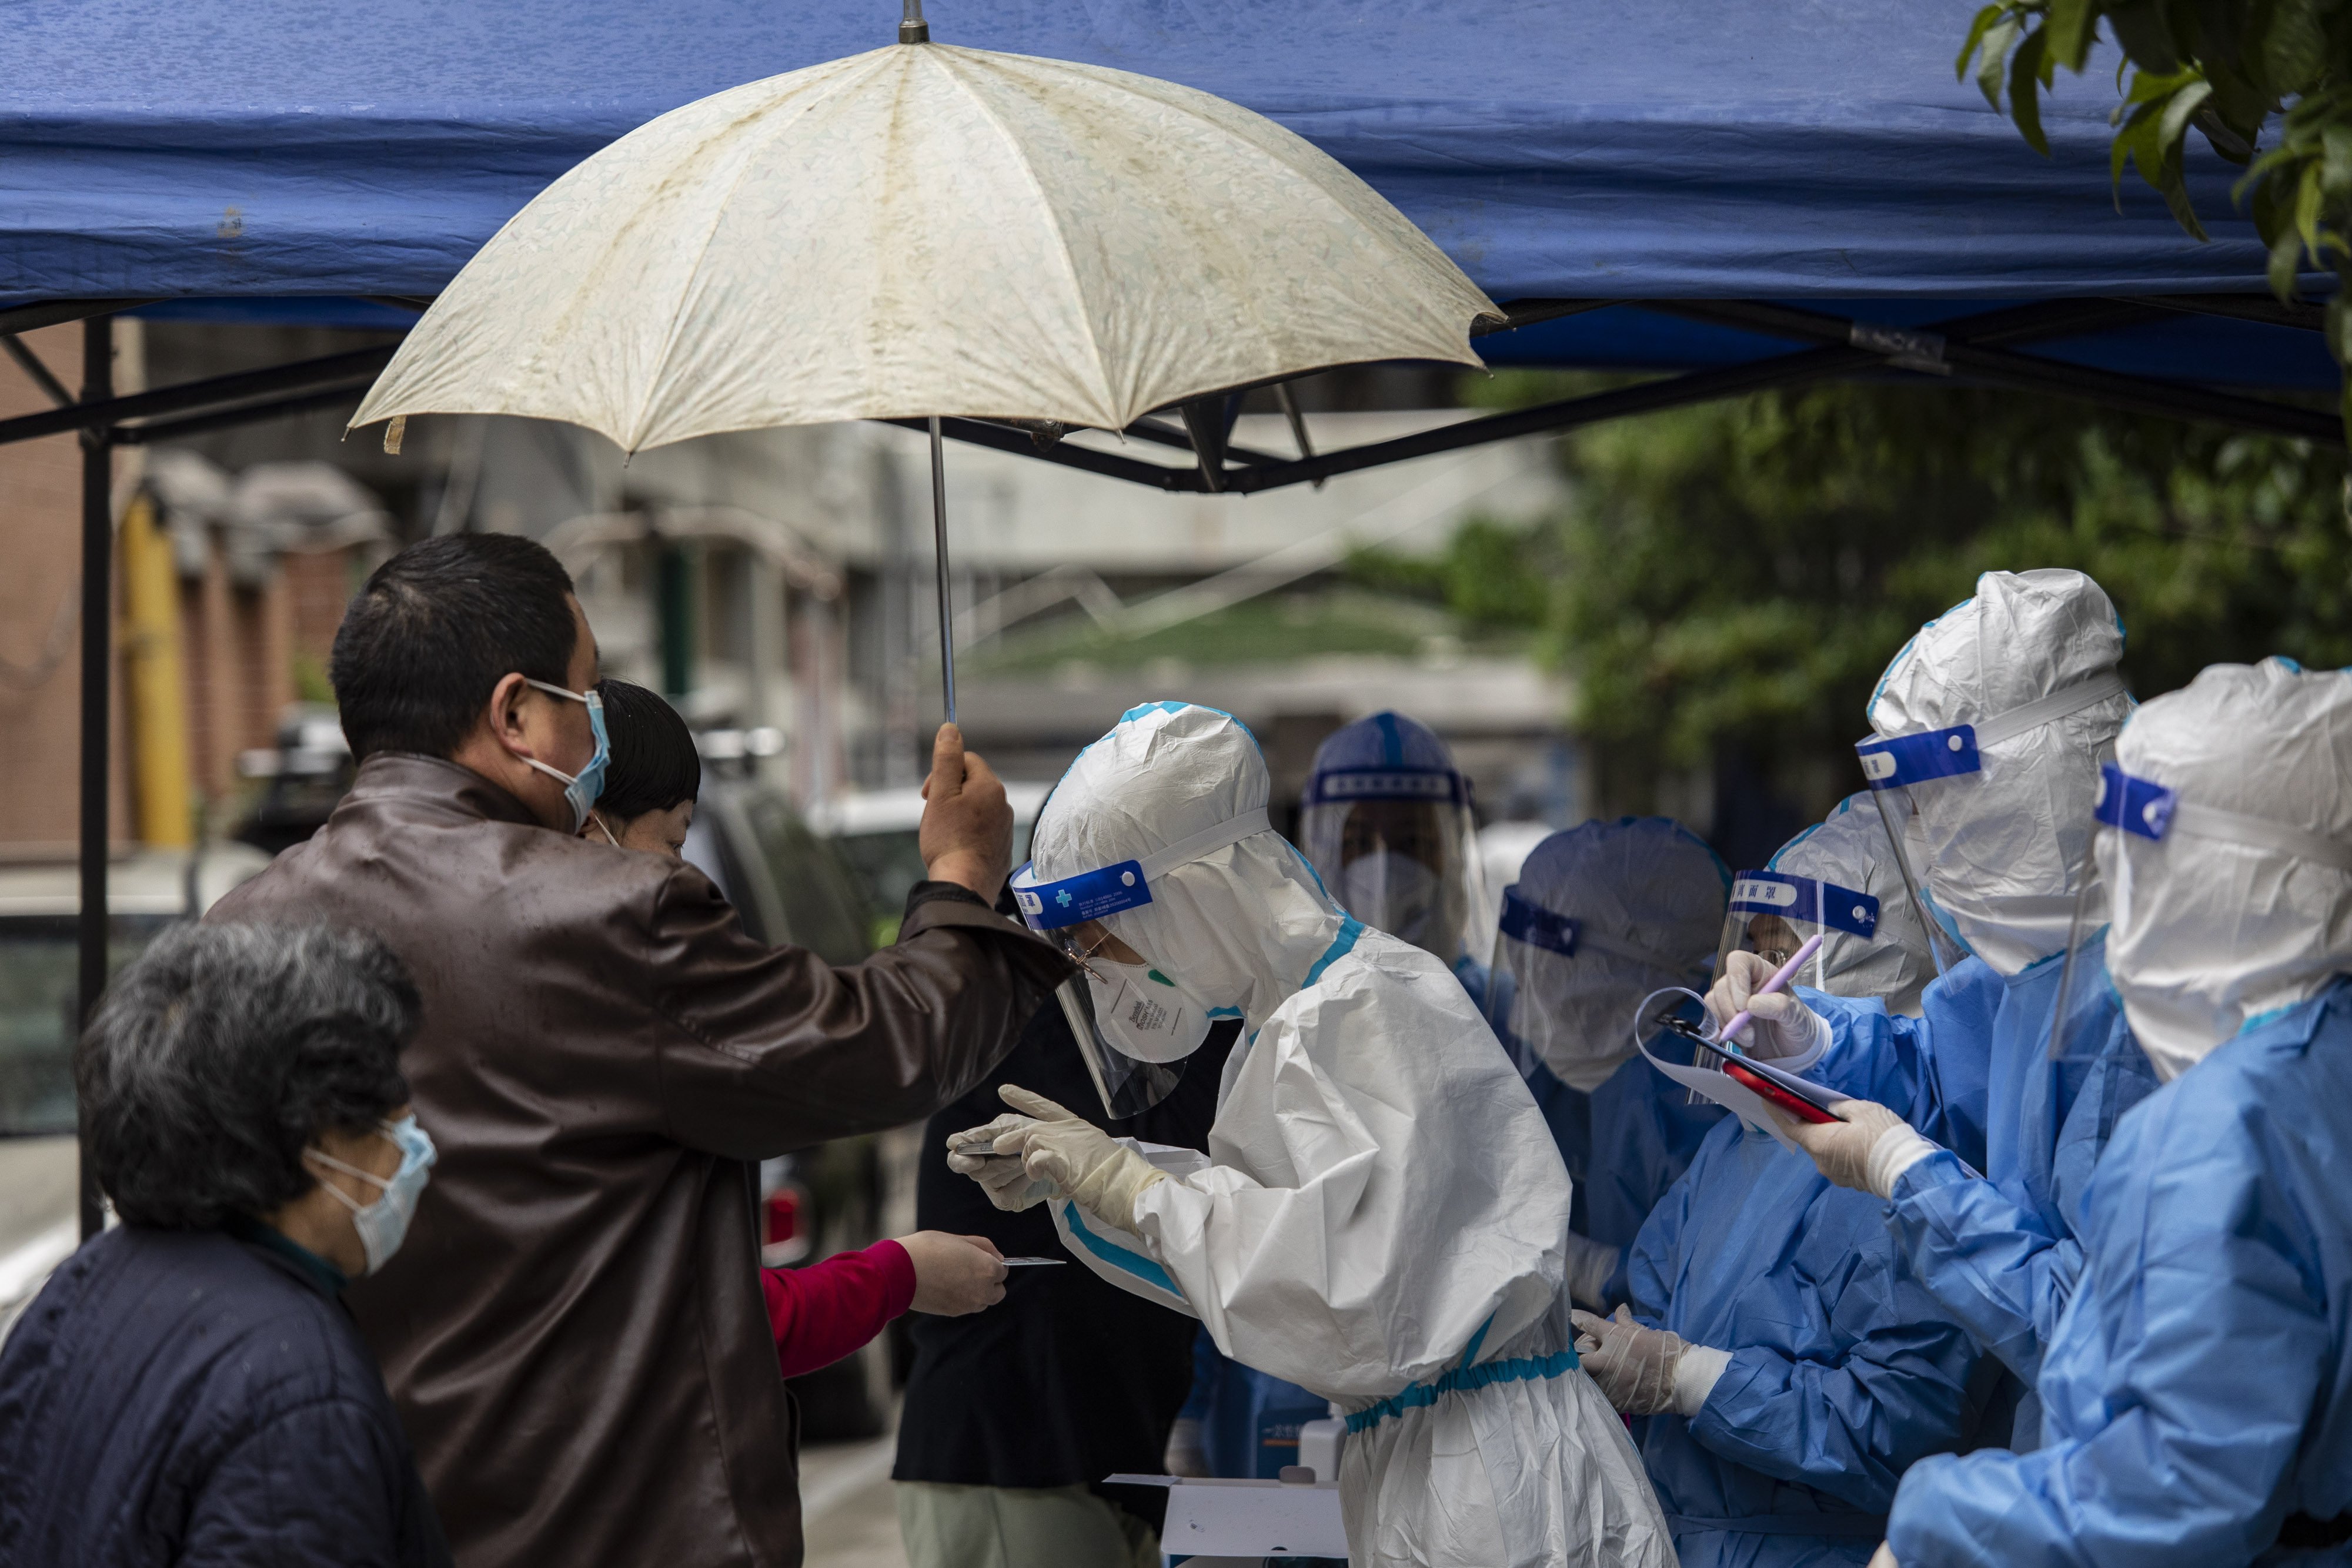 A team of health workers and volunteers check the identification of residents at a Covid-19 testing station in a neighbourhood where a suspected flare-up in cases occurred in Shanghai on May 9. Photo: Bloomberg